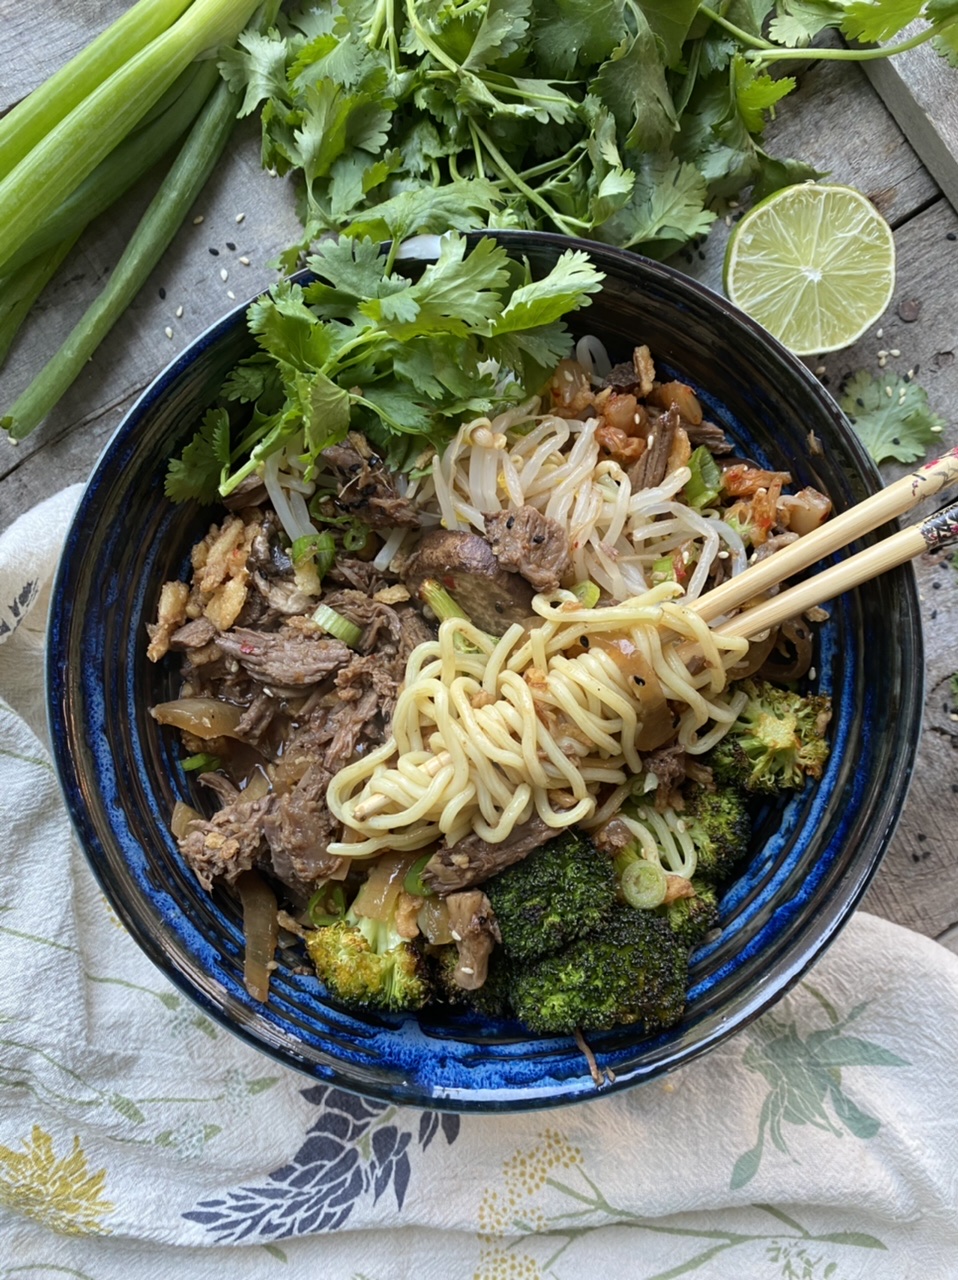 88E42D6C CD67 4A4D A508 4C15875C0F60 - Slow Cooker Asian Ginger Noodles with Spicy Pulled Beef & Roasted Broccoli